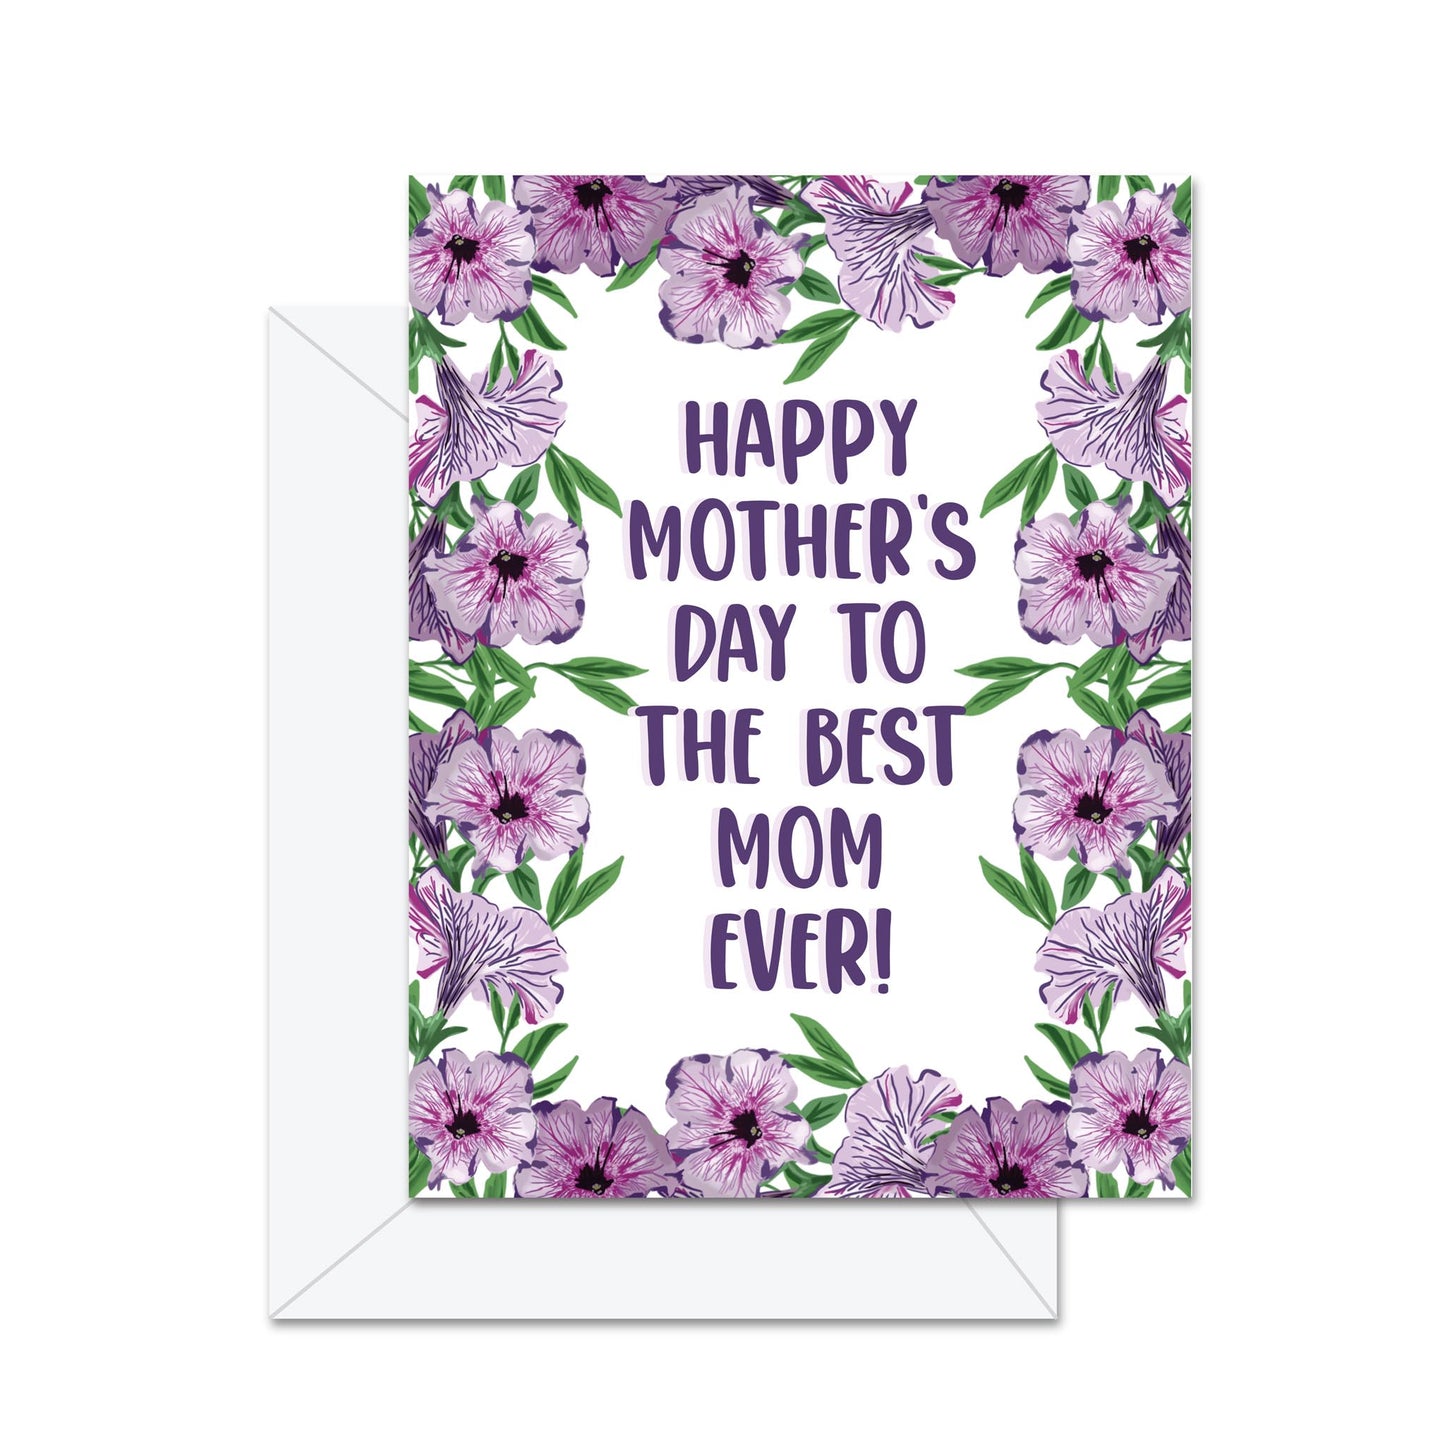 Happy Mother's Day To The Best Mom Ever! - Greeting Card